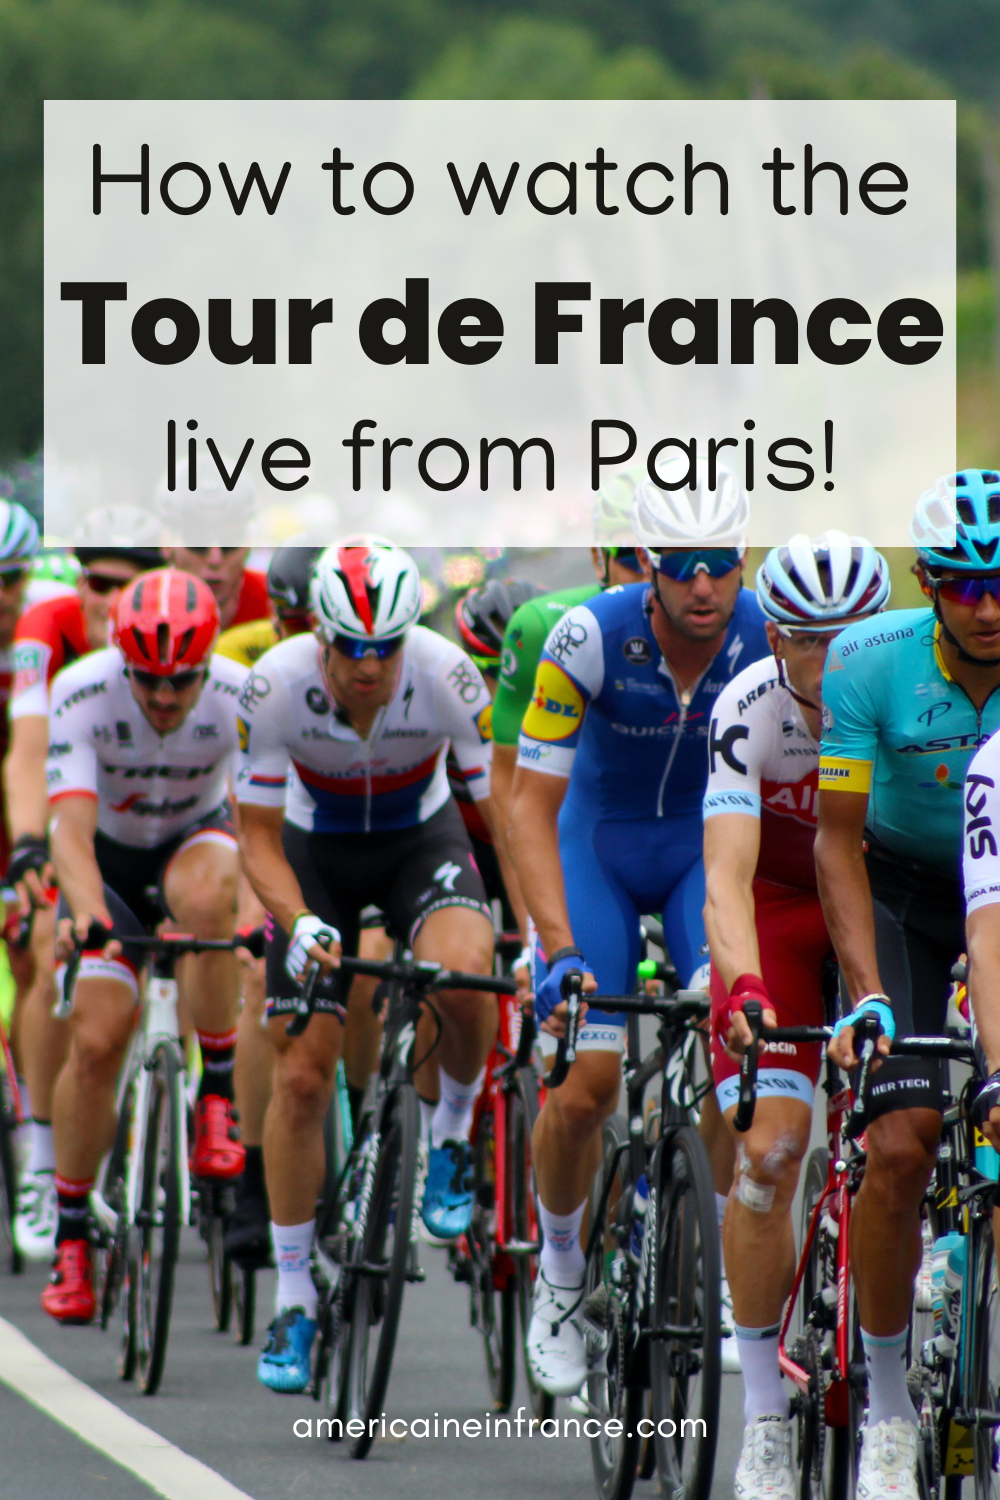 Tips for Watching the Tour de France in Paris